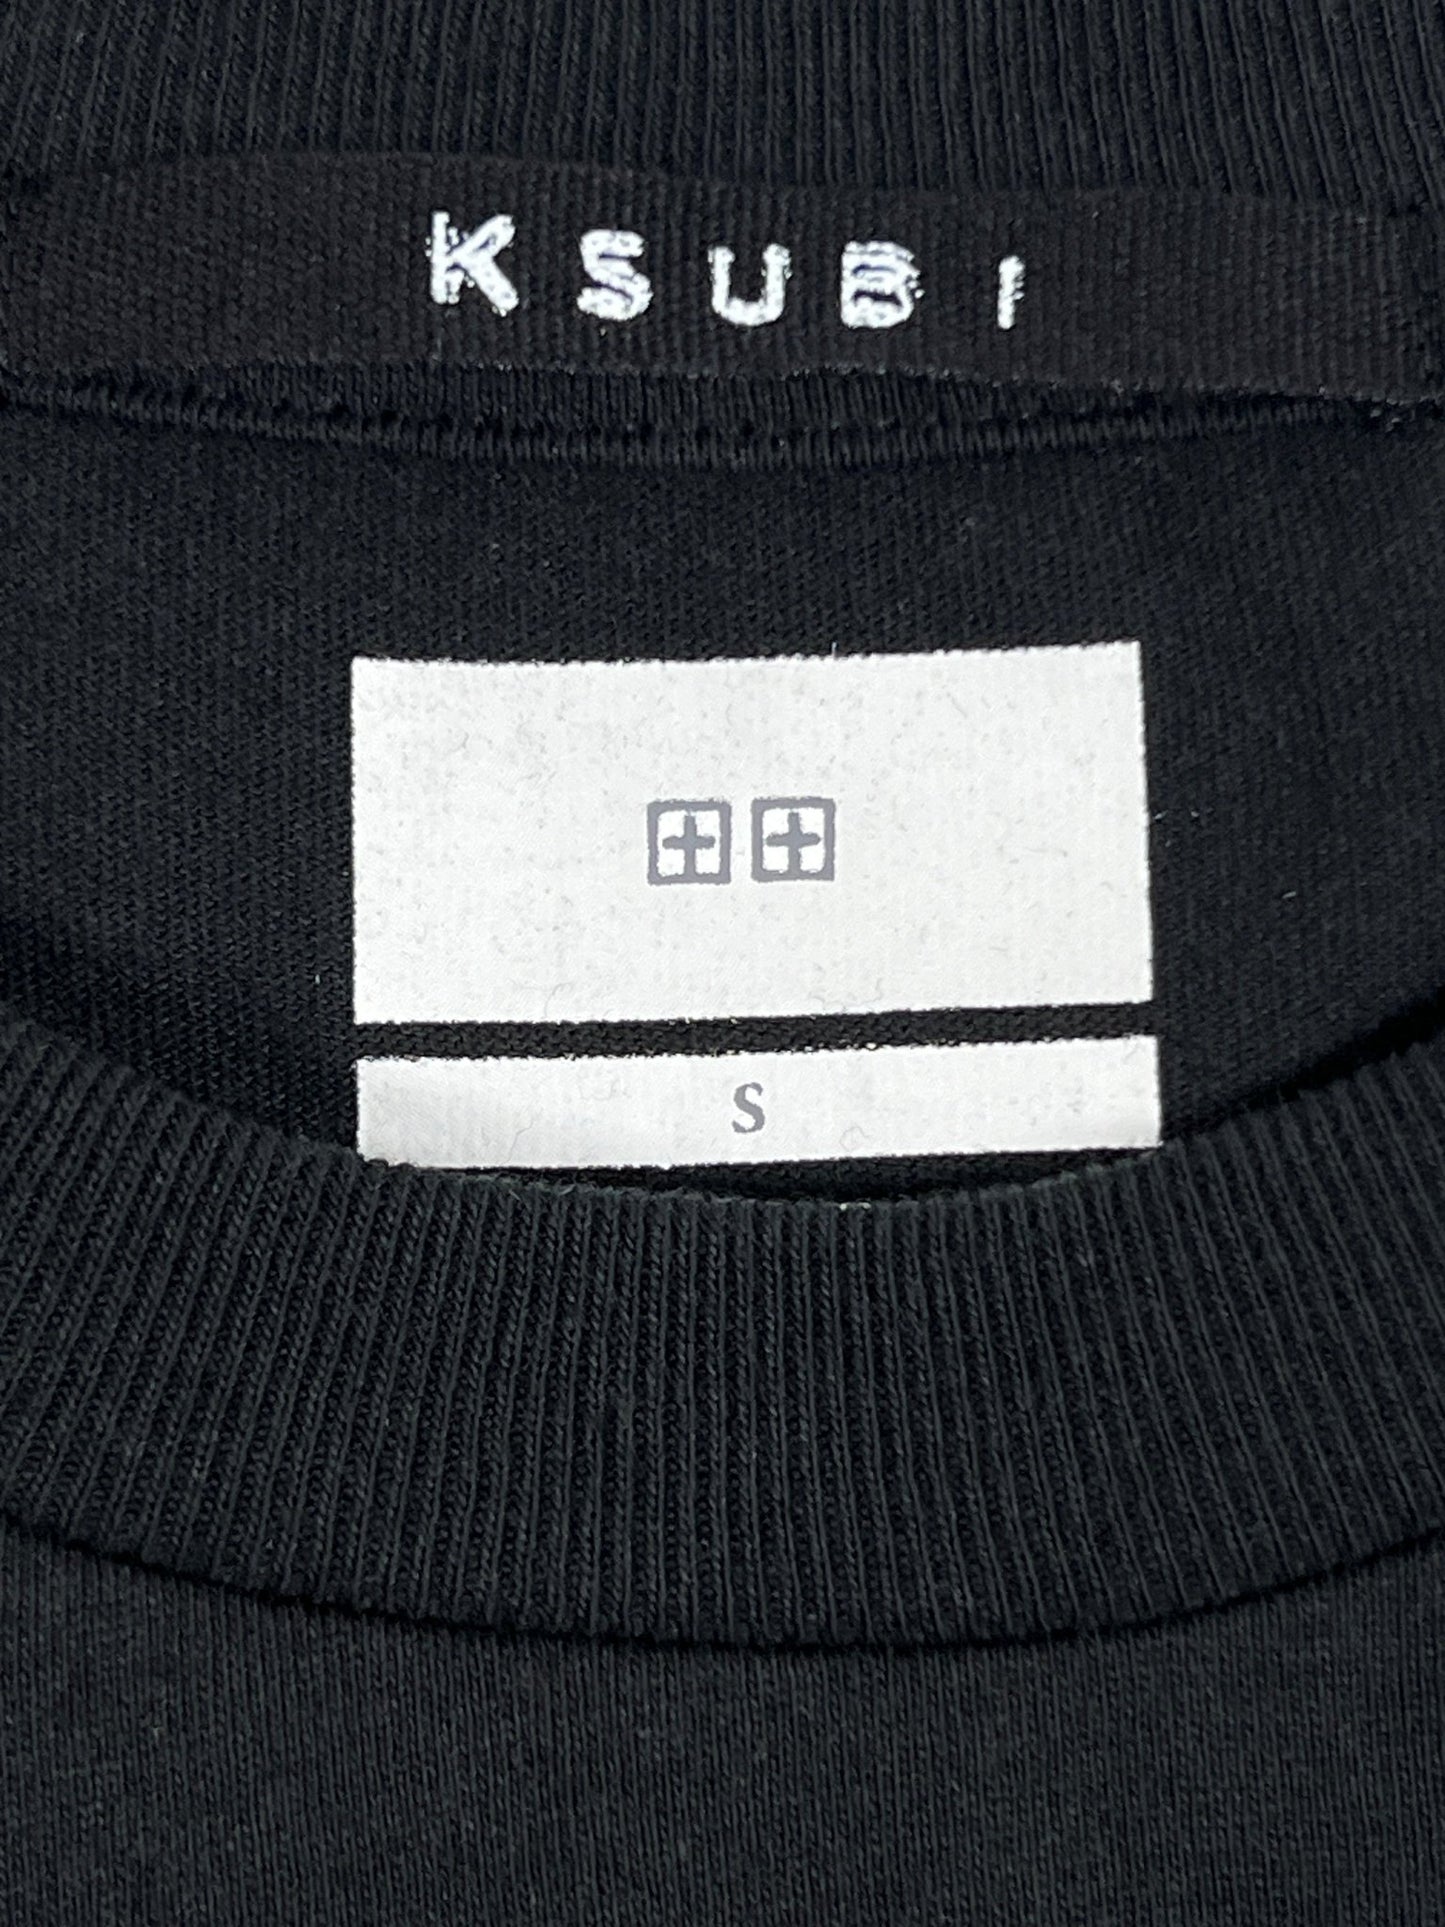 Image of a KSUBI SPACE PALM BIGGIE SS TEE JET BLACK, crafted from 100% cotton, with a visible clothing label displaying the brand name KSUBI and size 'S'.